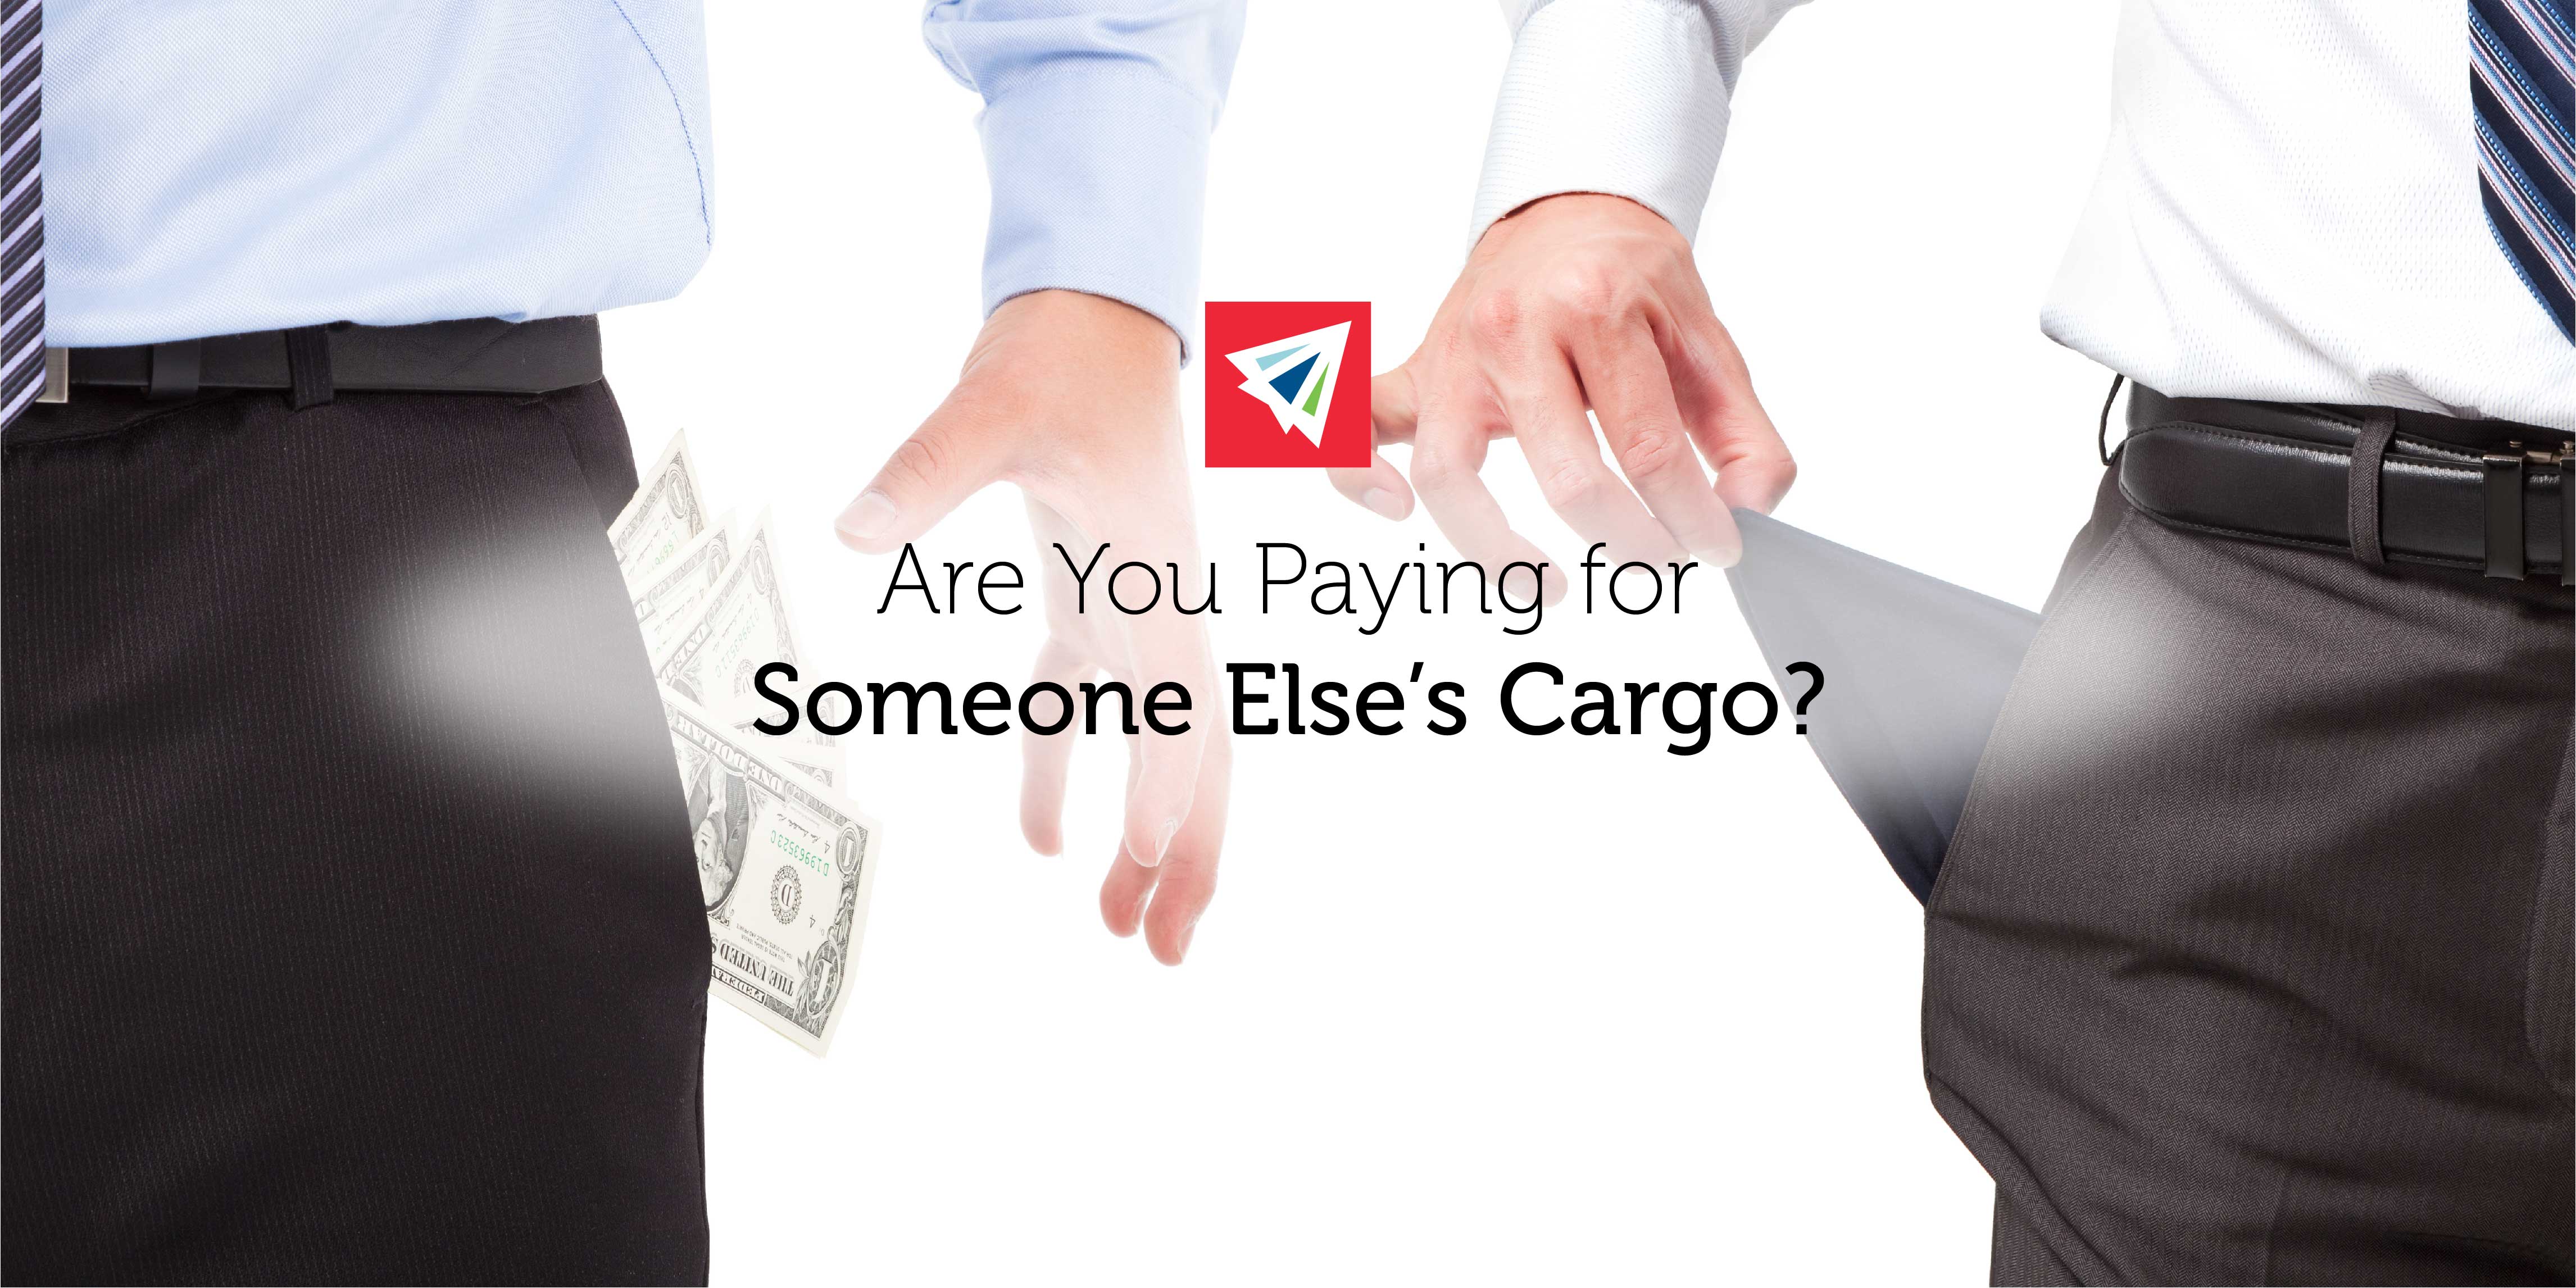 Are You Paying For Someone Else’s Cargo: General Average Law